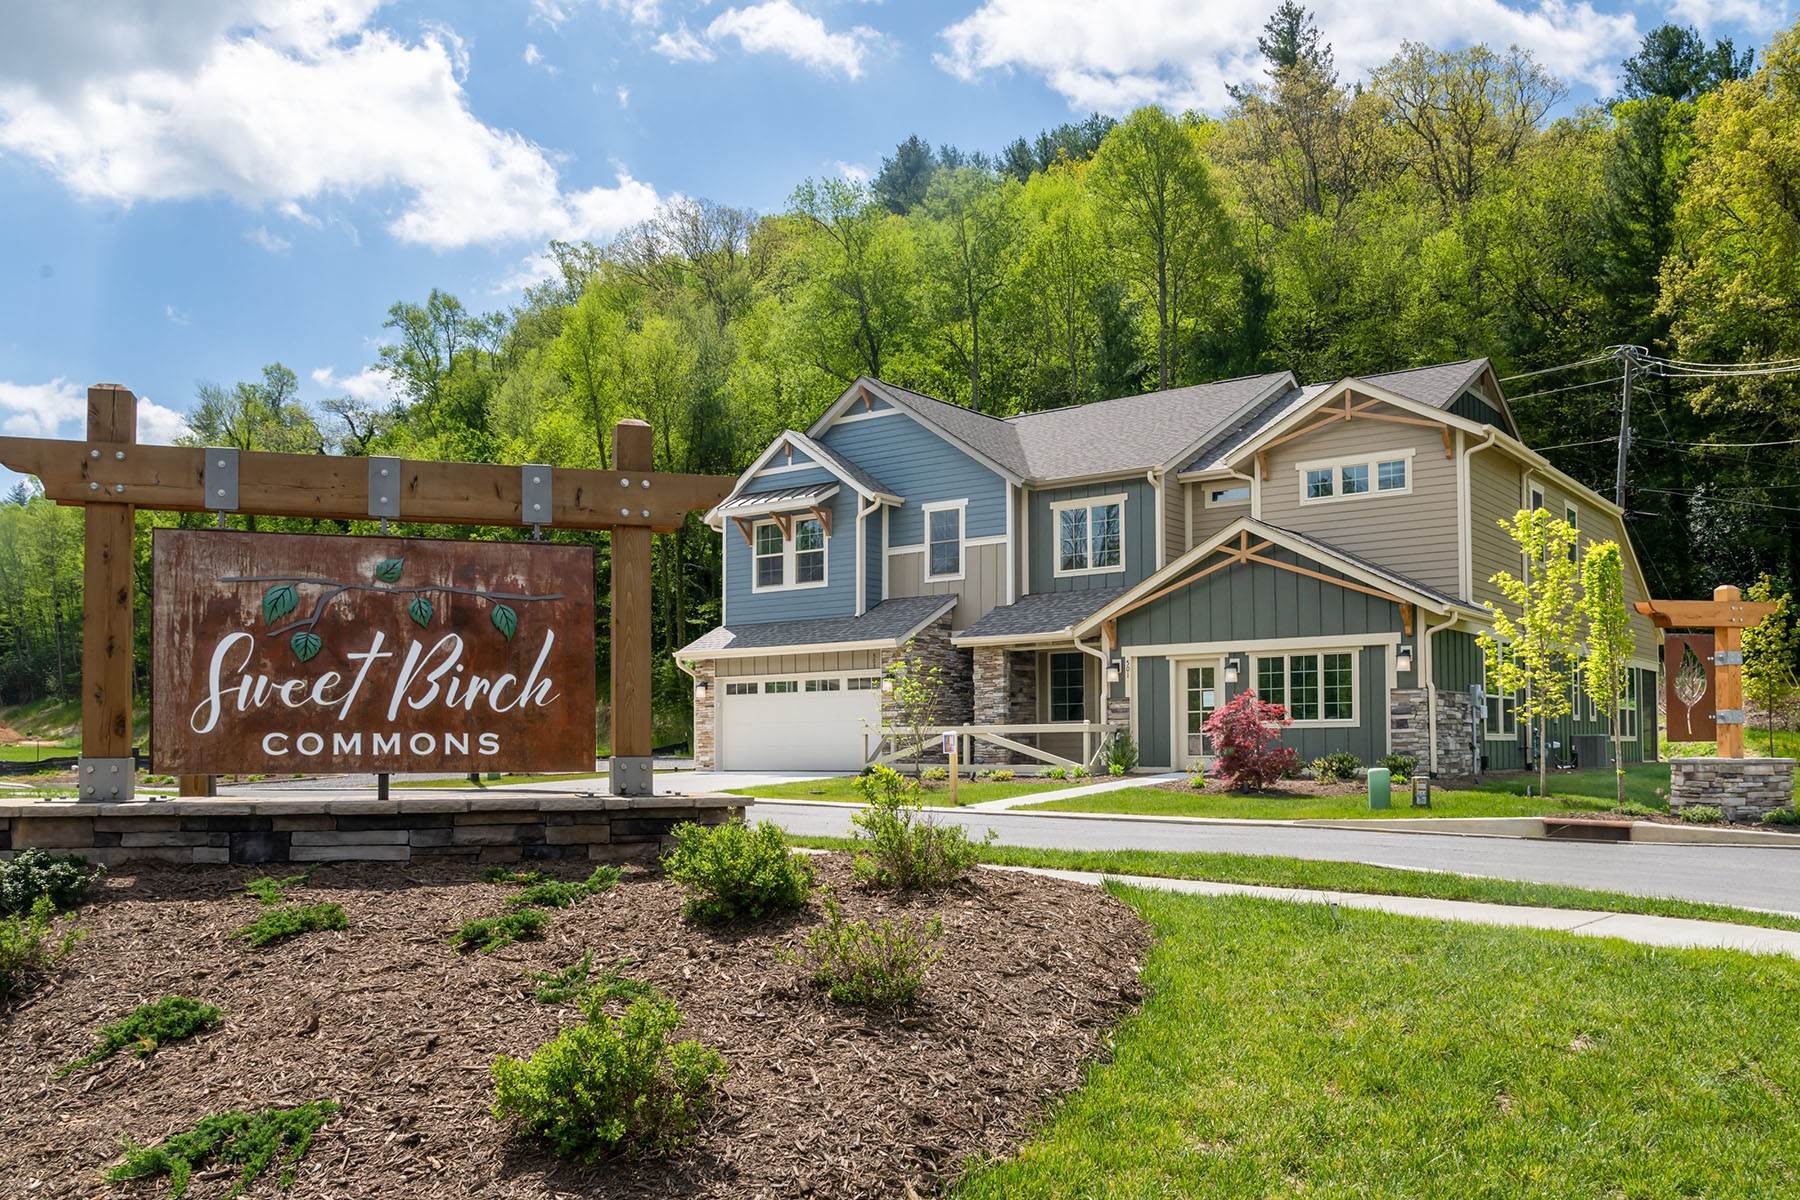 Condominiums for Sale at Sweet Birch Commons 560 Sweet Birch Park Lane Black Mountain, North Carolina 28711 United States